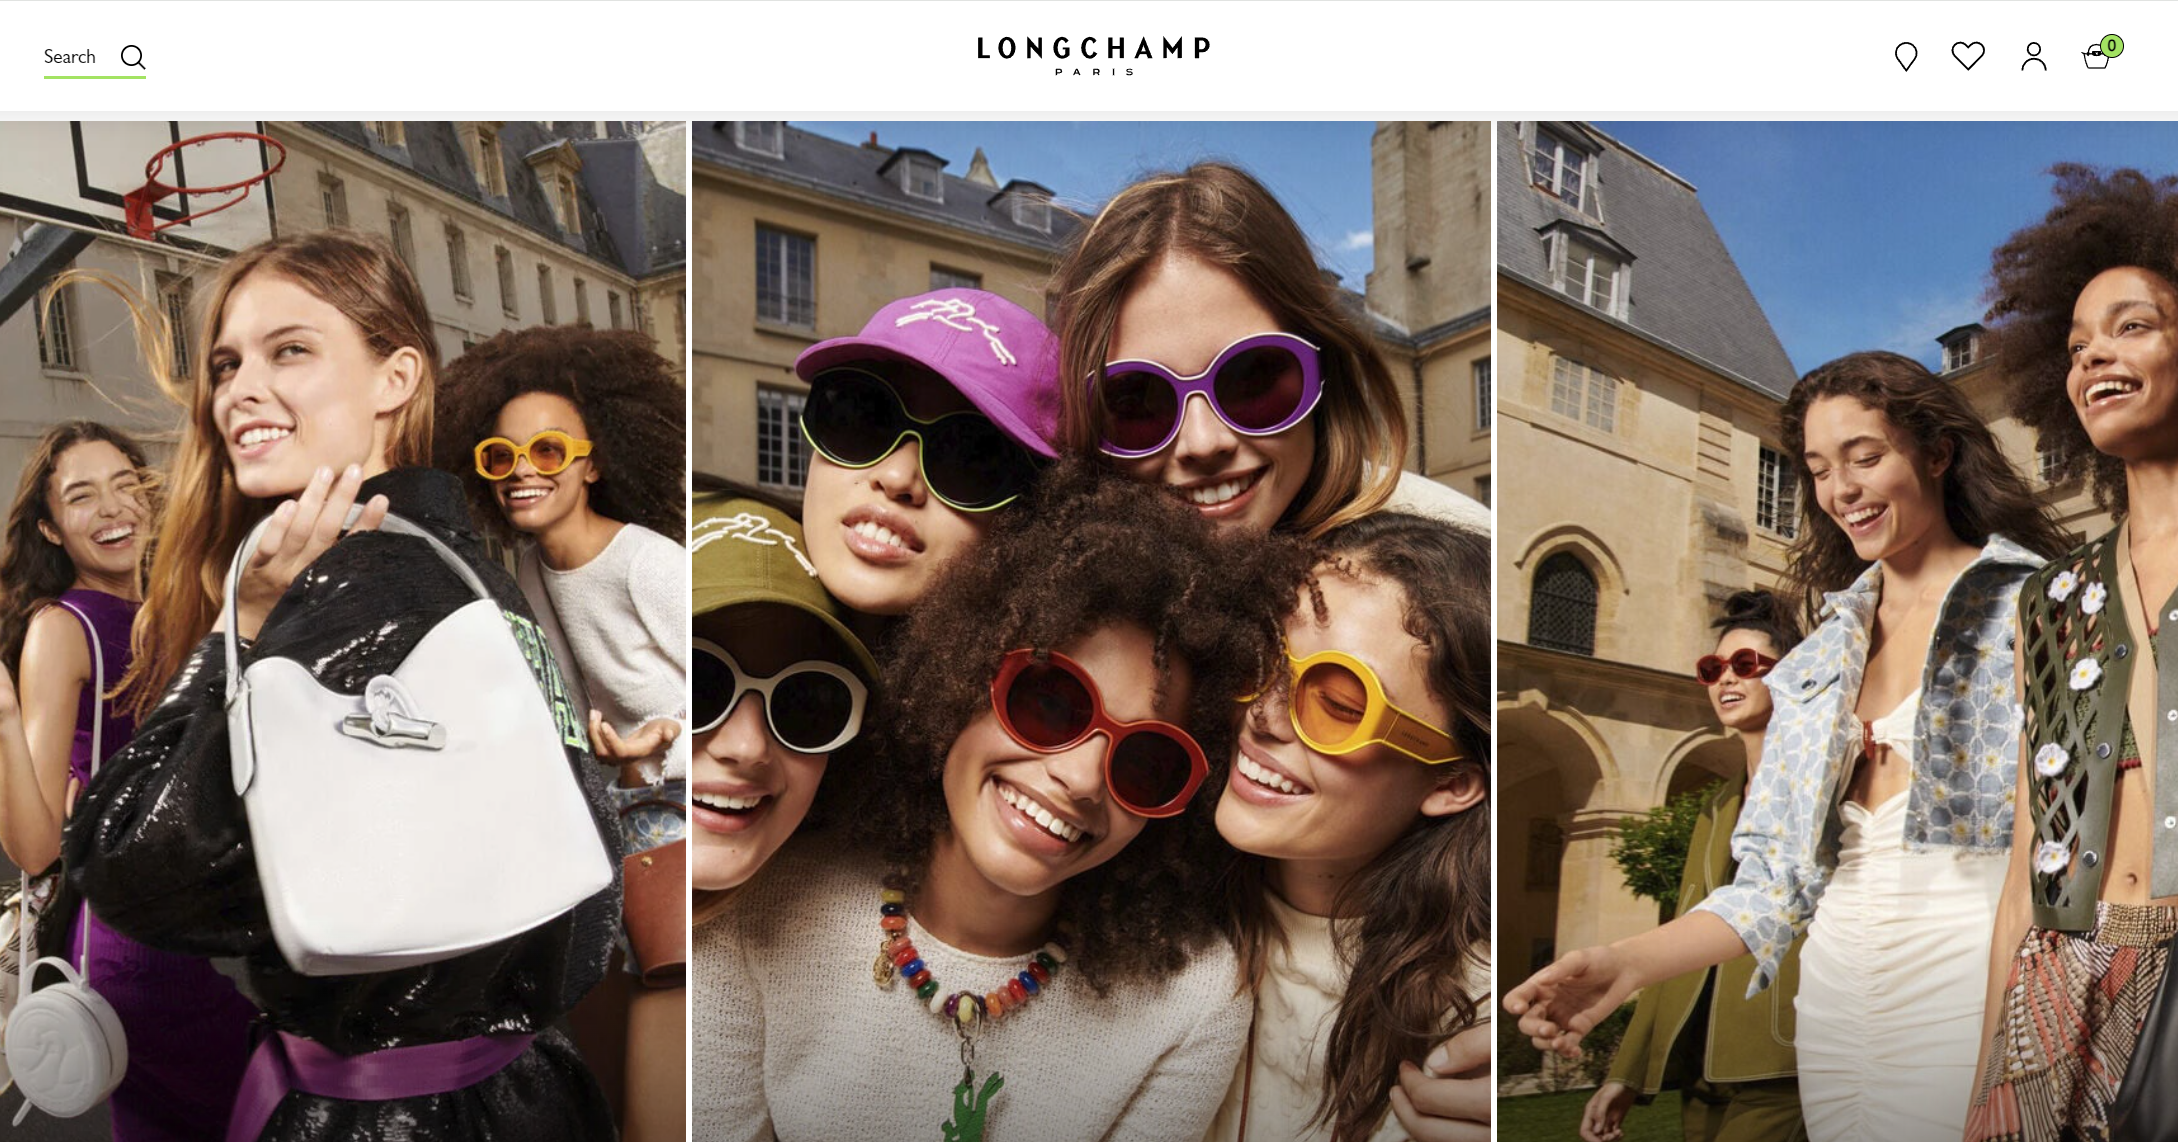 Longchamp’s Sales Surge by 44% Last Year, with an 84% Increase in Mainland China